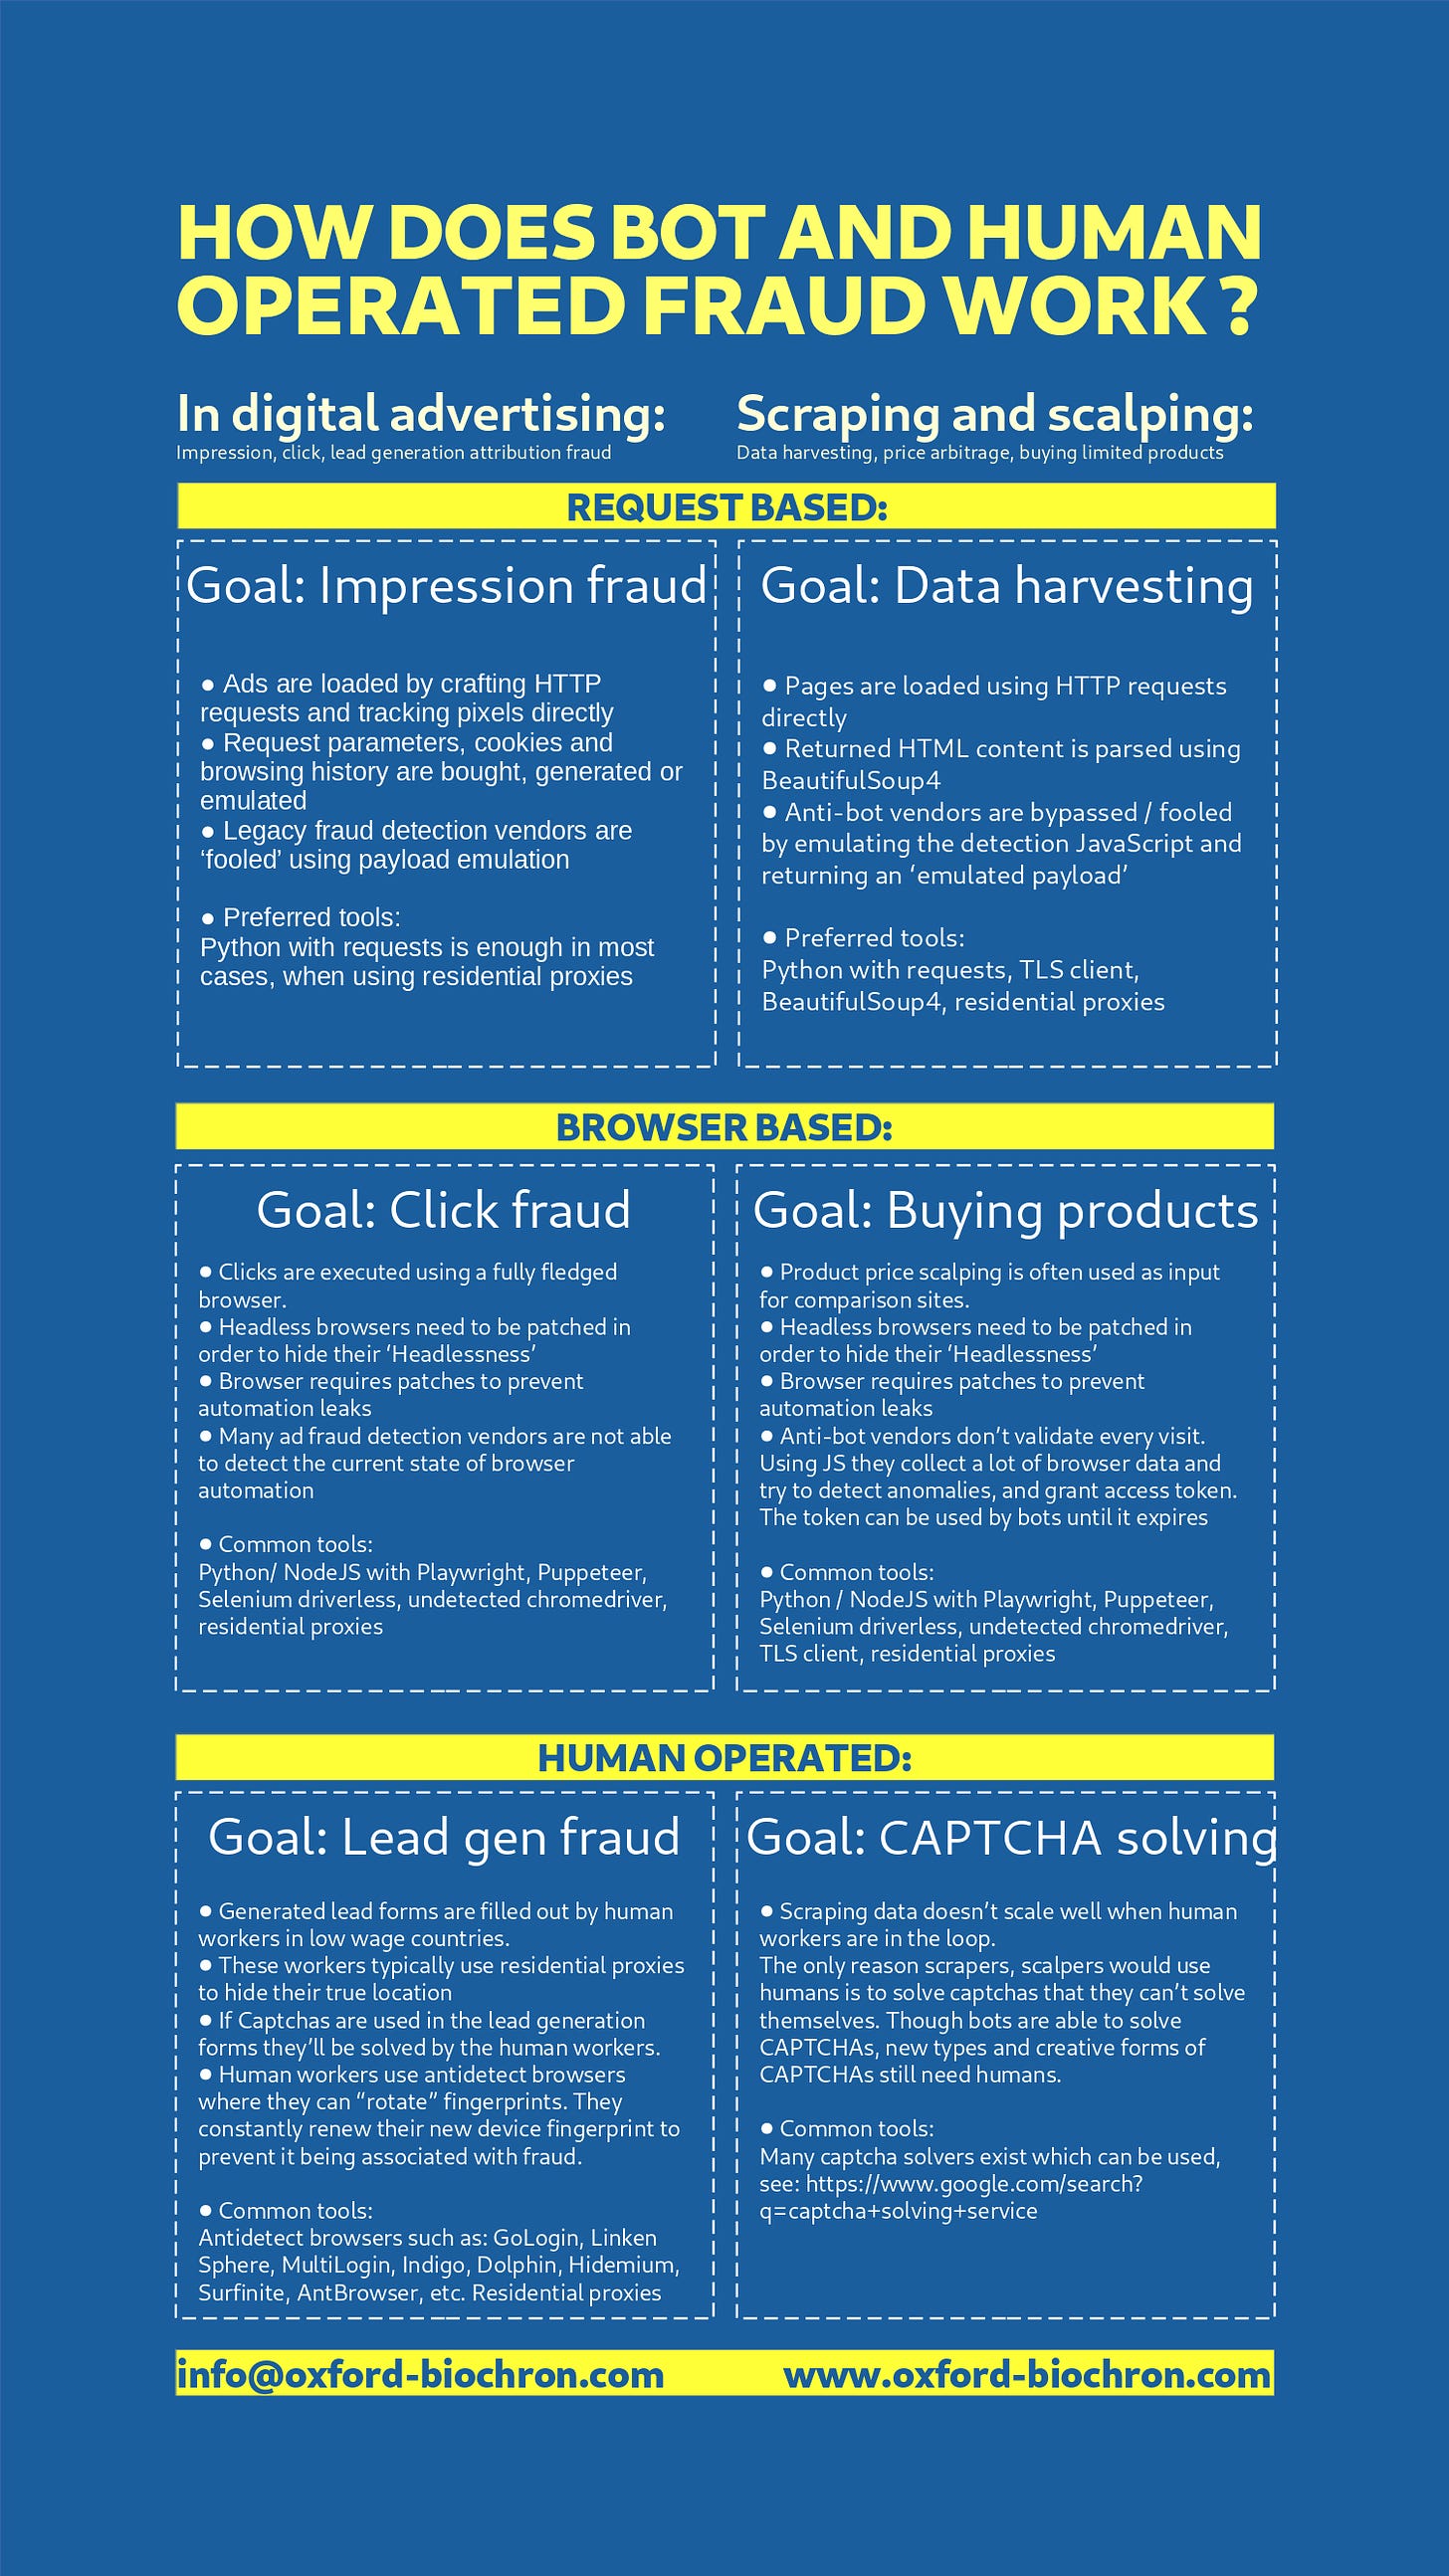 Infographic showing the differences between bots in the digital advertising ecosystem and bots scraping and/or scalping.